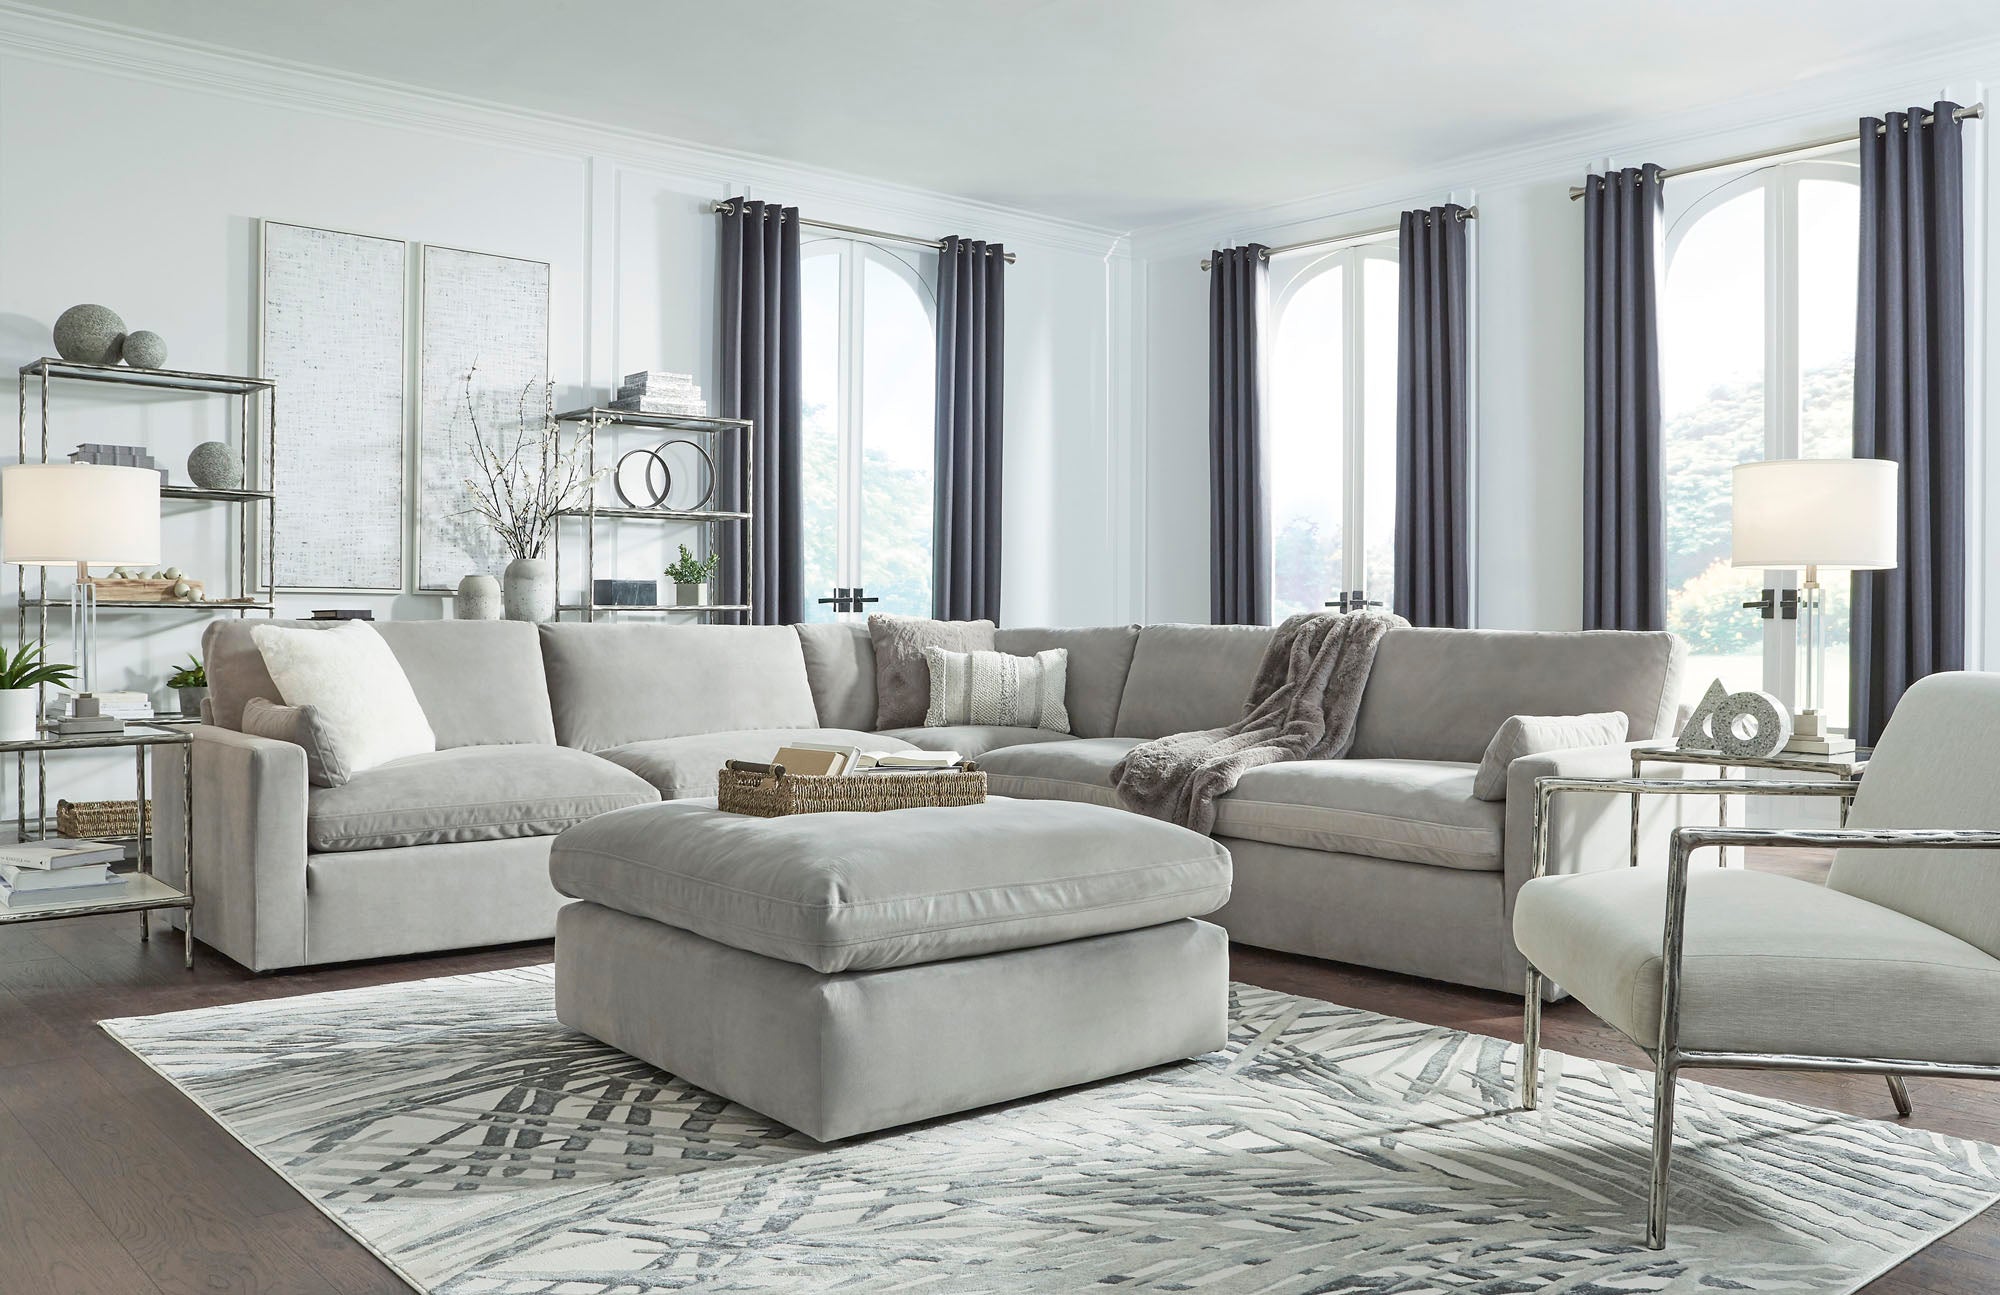 Sophie Gray 5 Piece Sectional - MJM Furniture